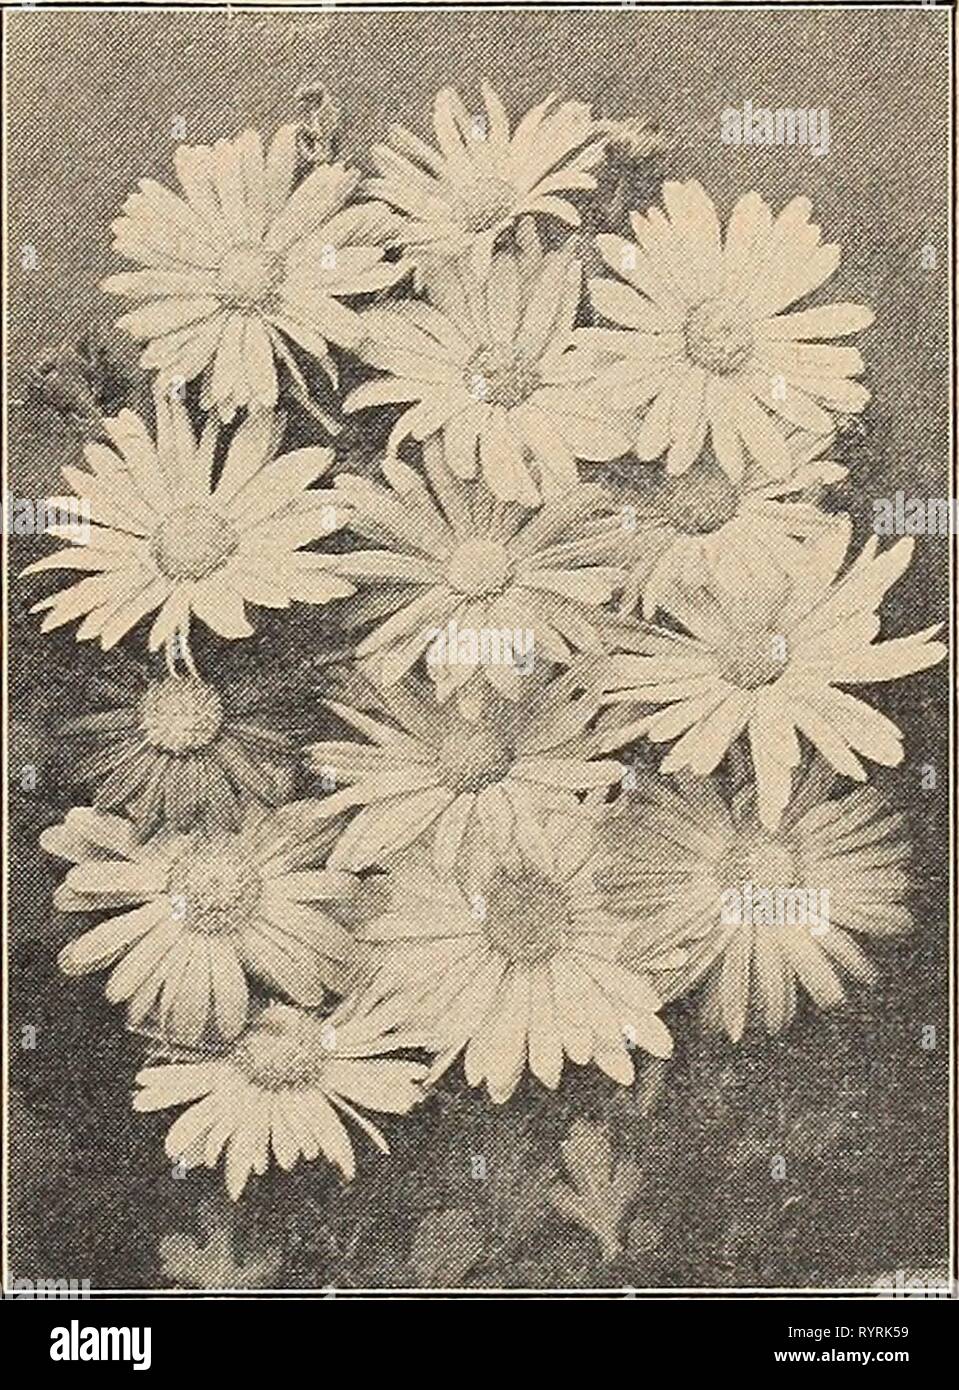 Dreer's wholesale catalog for florists Dreer's wholesale catalog for florists and market gardeners : 1942 winter spring summer . dreerswholesalec1942henr Year: 1942  Cerastium tomentosum Cerastium—Snow in Summer Tomentosum. A desirable low-growing plant with silvery foliage and white flowers in June. Suitable for the rockery or for carpeting dry, sunny spots or for covering graves. Trade pkt. 25c; oz. $1.25. Cheiranthus These are biennials. Very effective in the rockery or front of border. Allioni (Siberian 'Wallflower). Brilliant orange flowers. Trade pkt. 10c; oz. 30c; 14 lb. $1.00. —Golden  Stock Photo